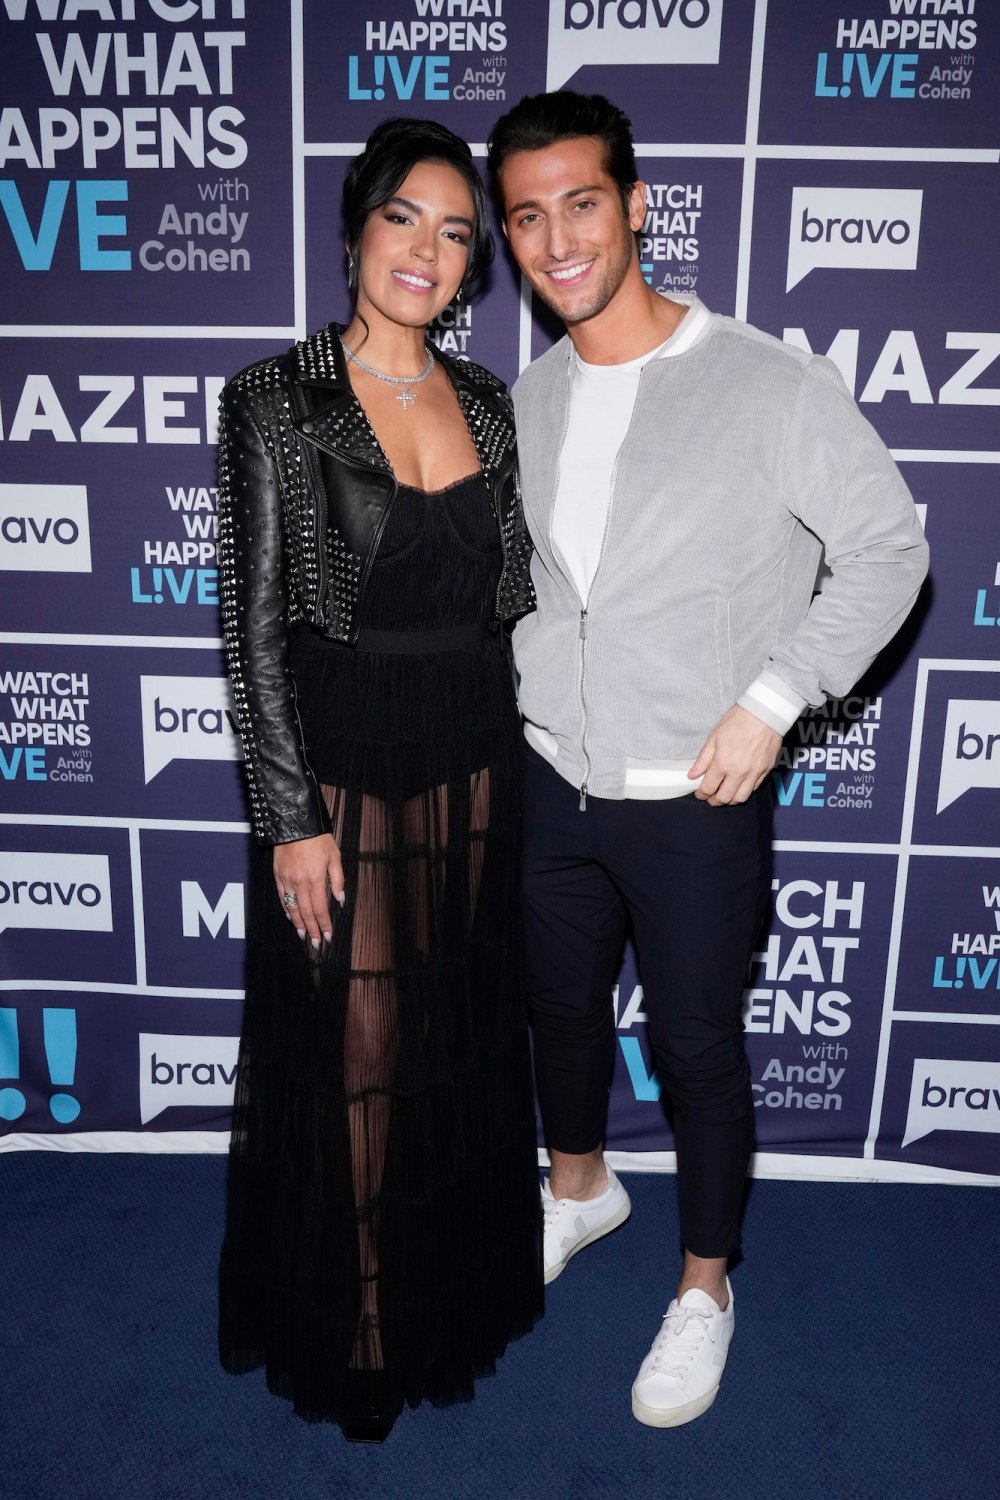 Joe Bradley and Danielle Olivera Are Dating: 'I Get All Giddy